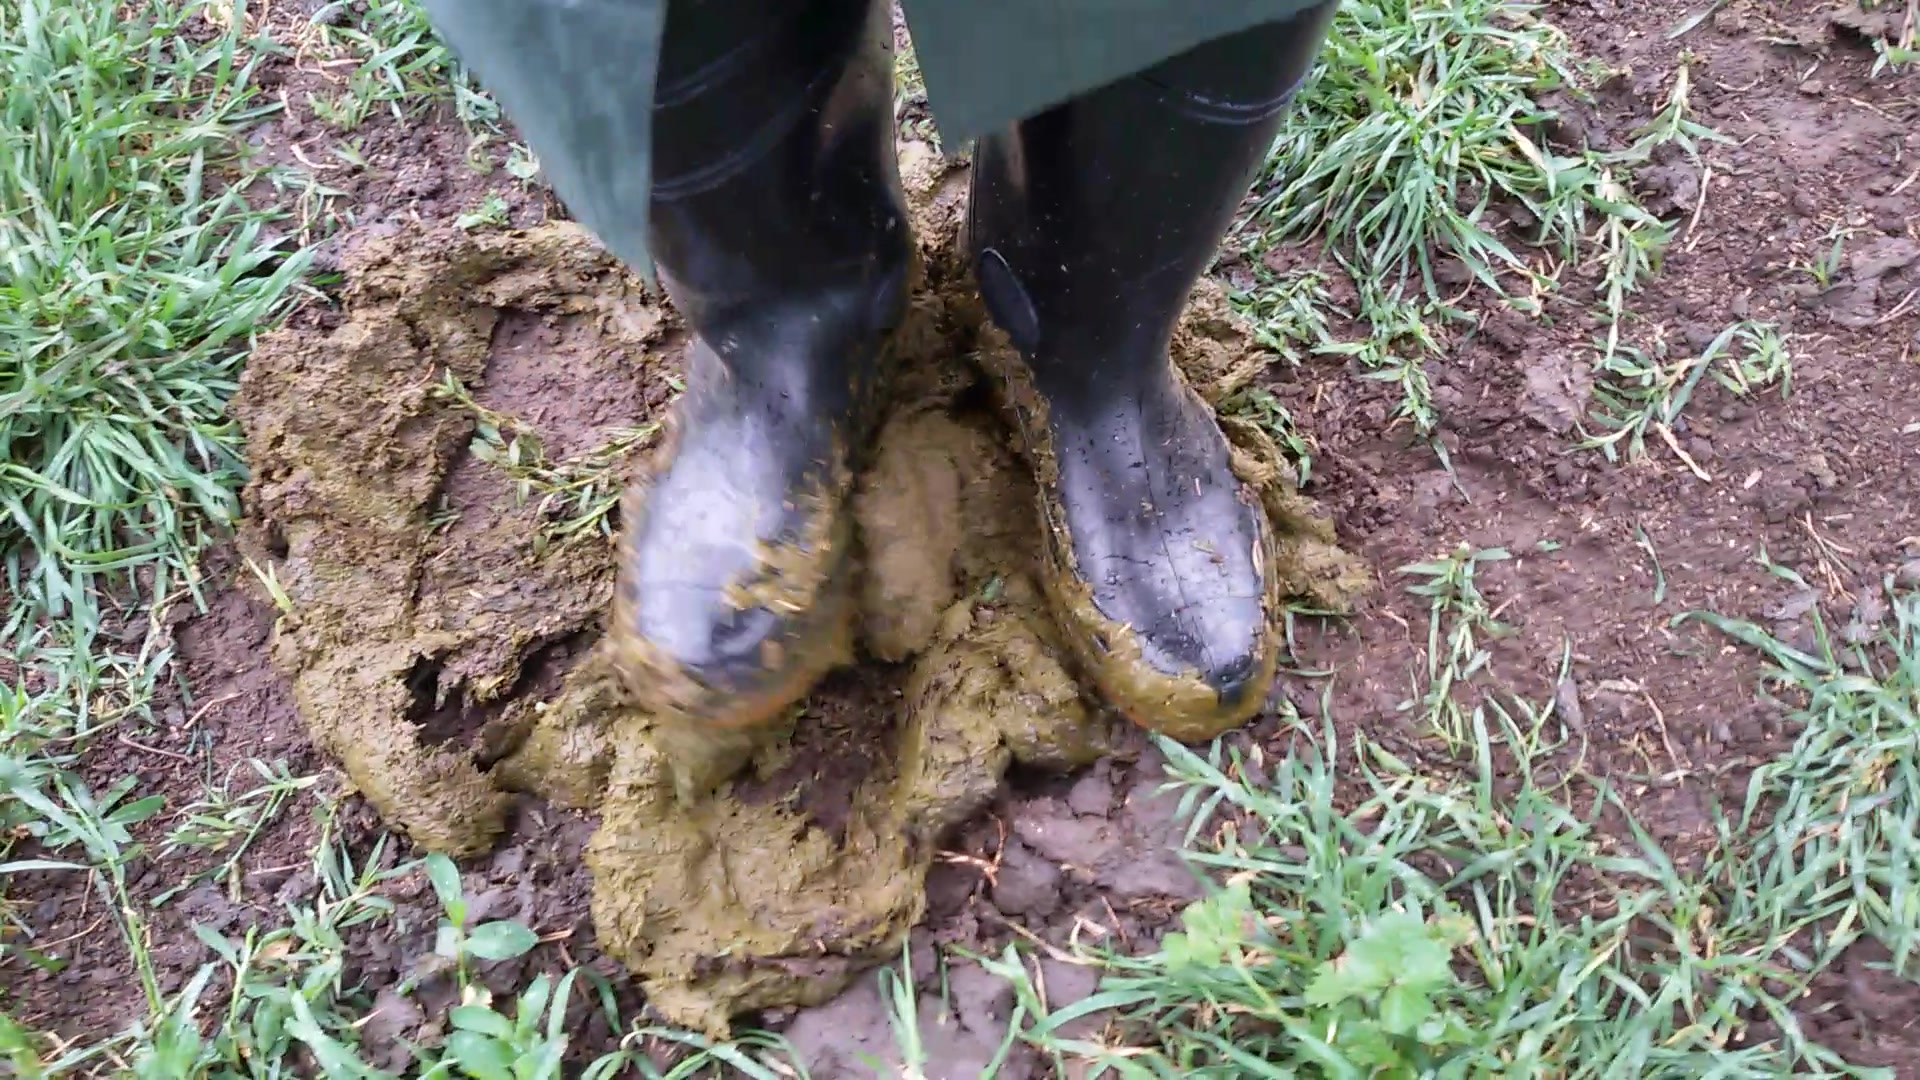 Rubber boots vs cowshit - video 19